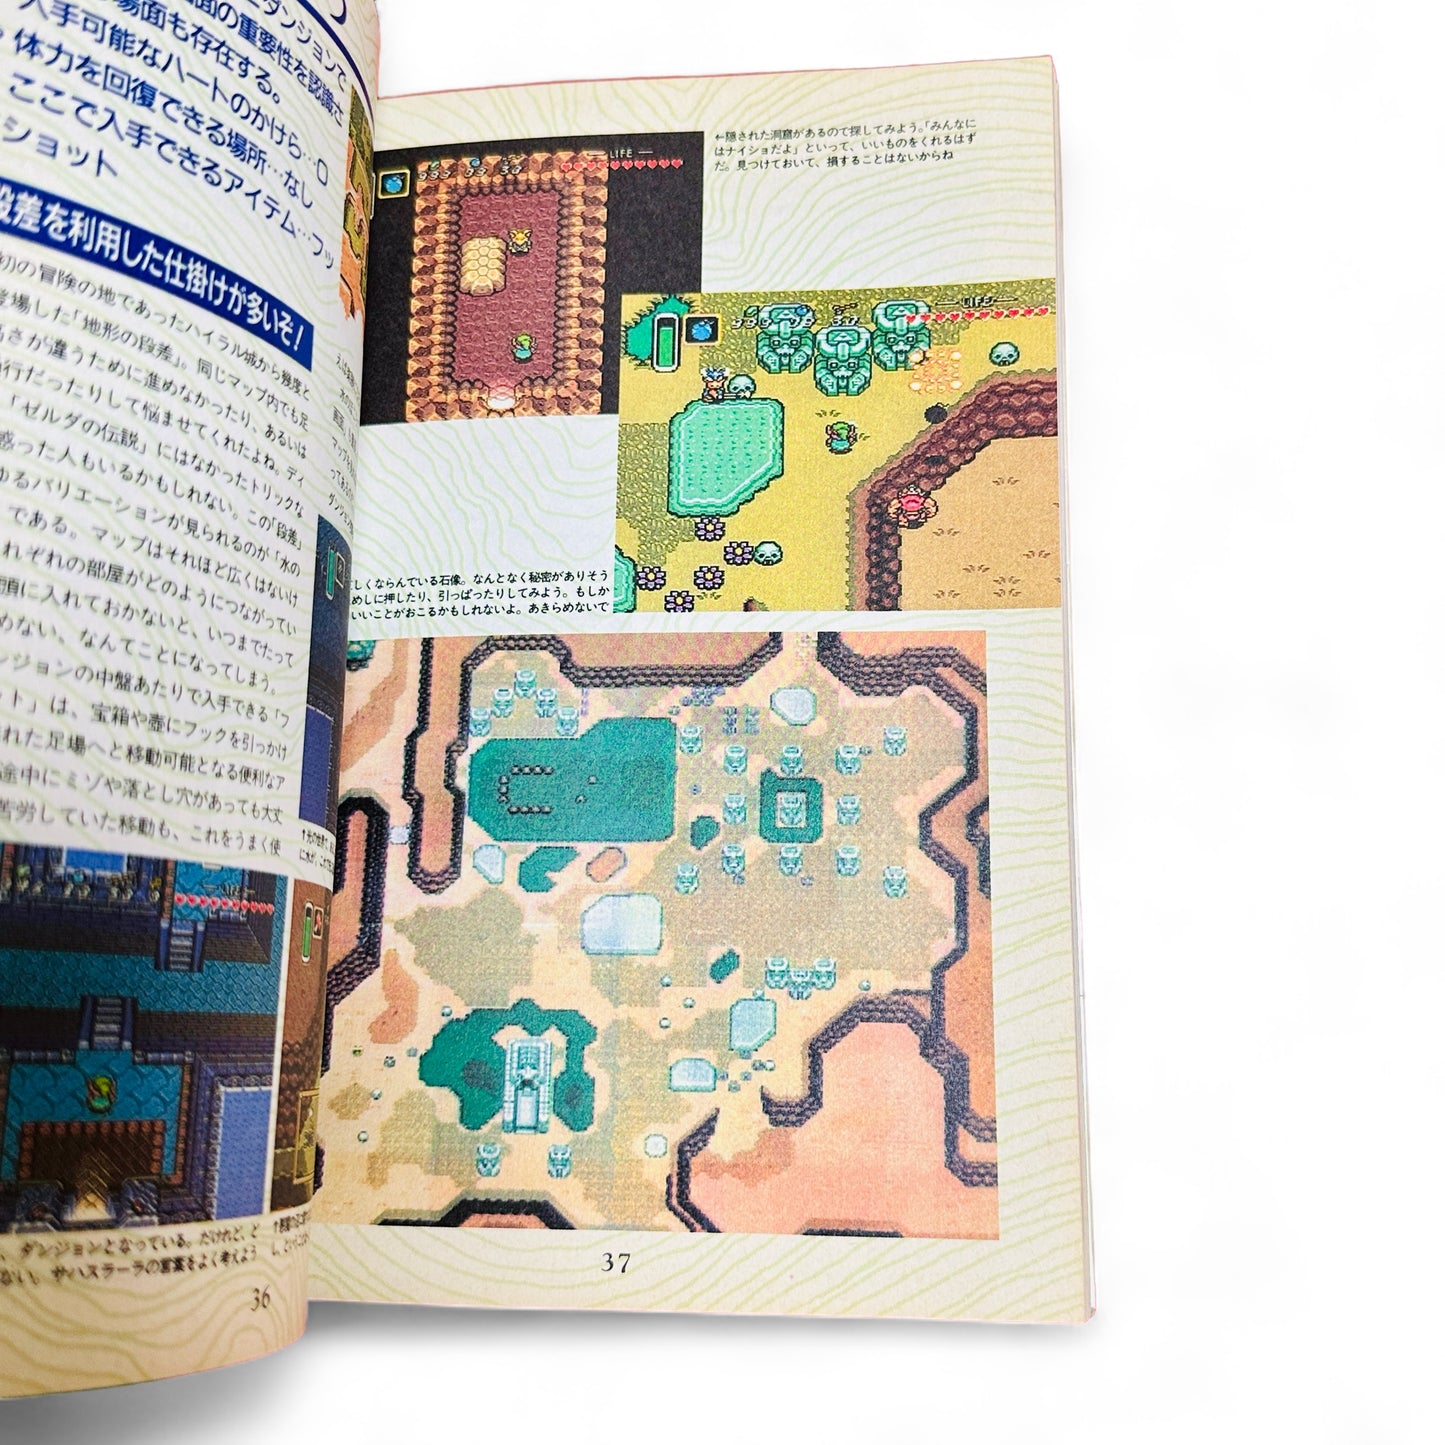 Guide de The Legend of Zelda: A Link to the Past